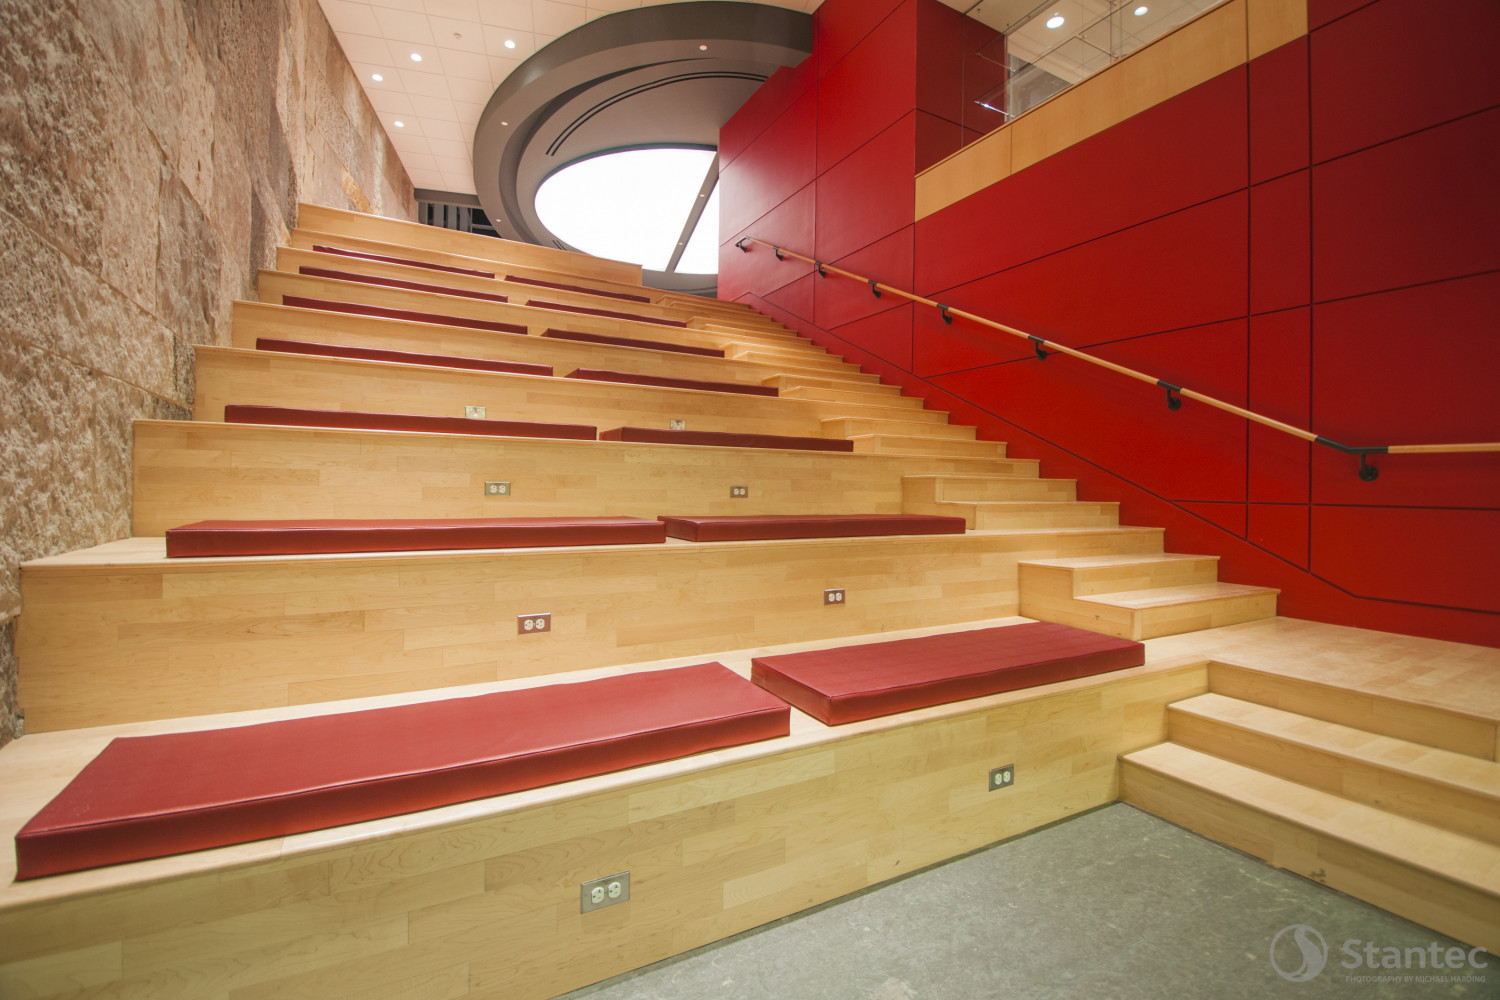 The Straz Center includes a large stepped seating area with advanced media capabilities.